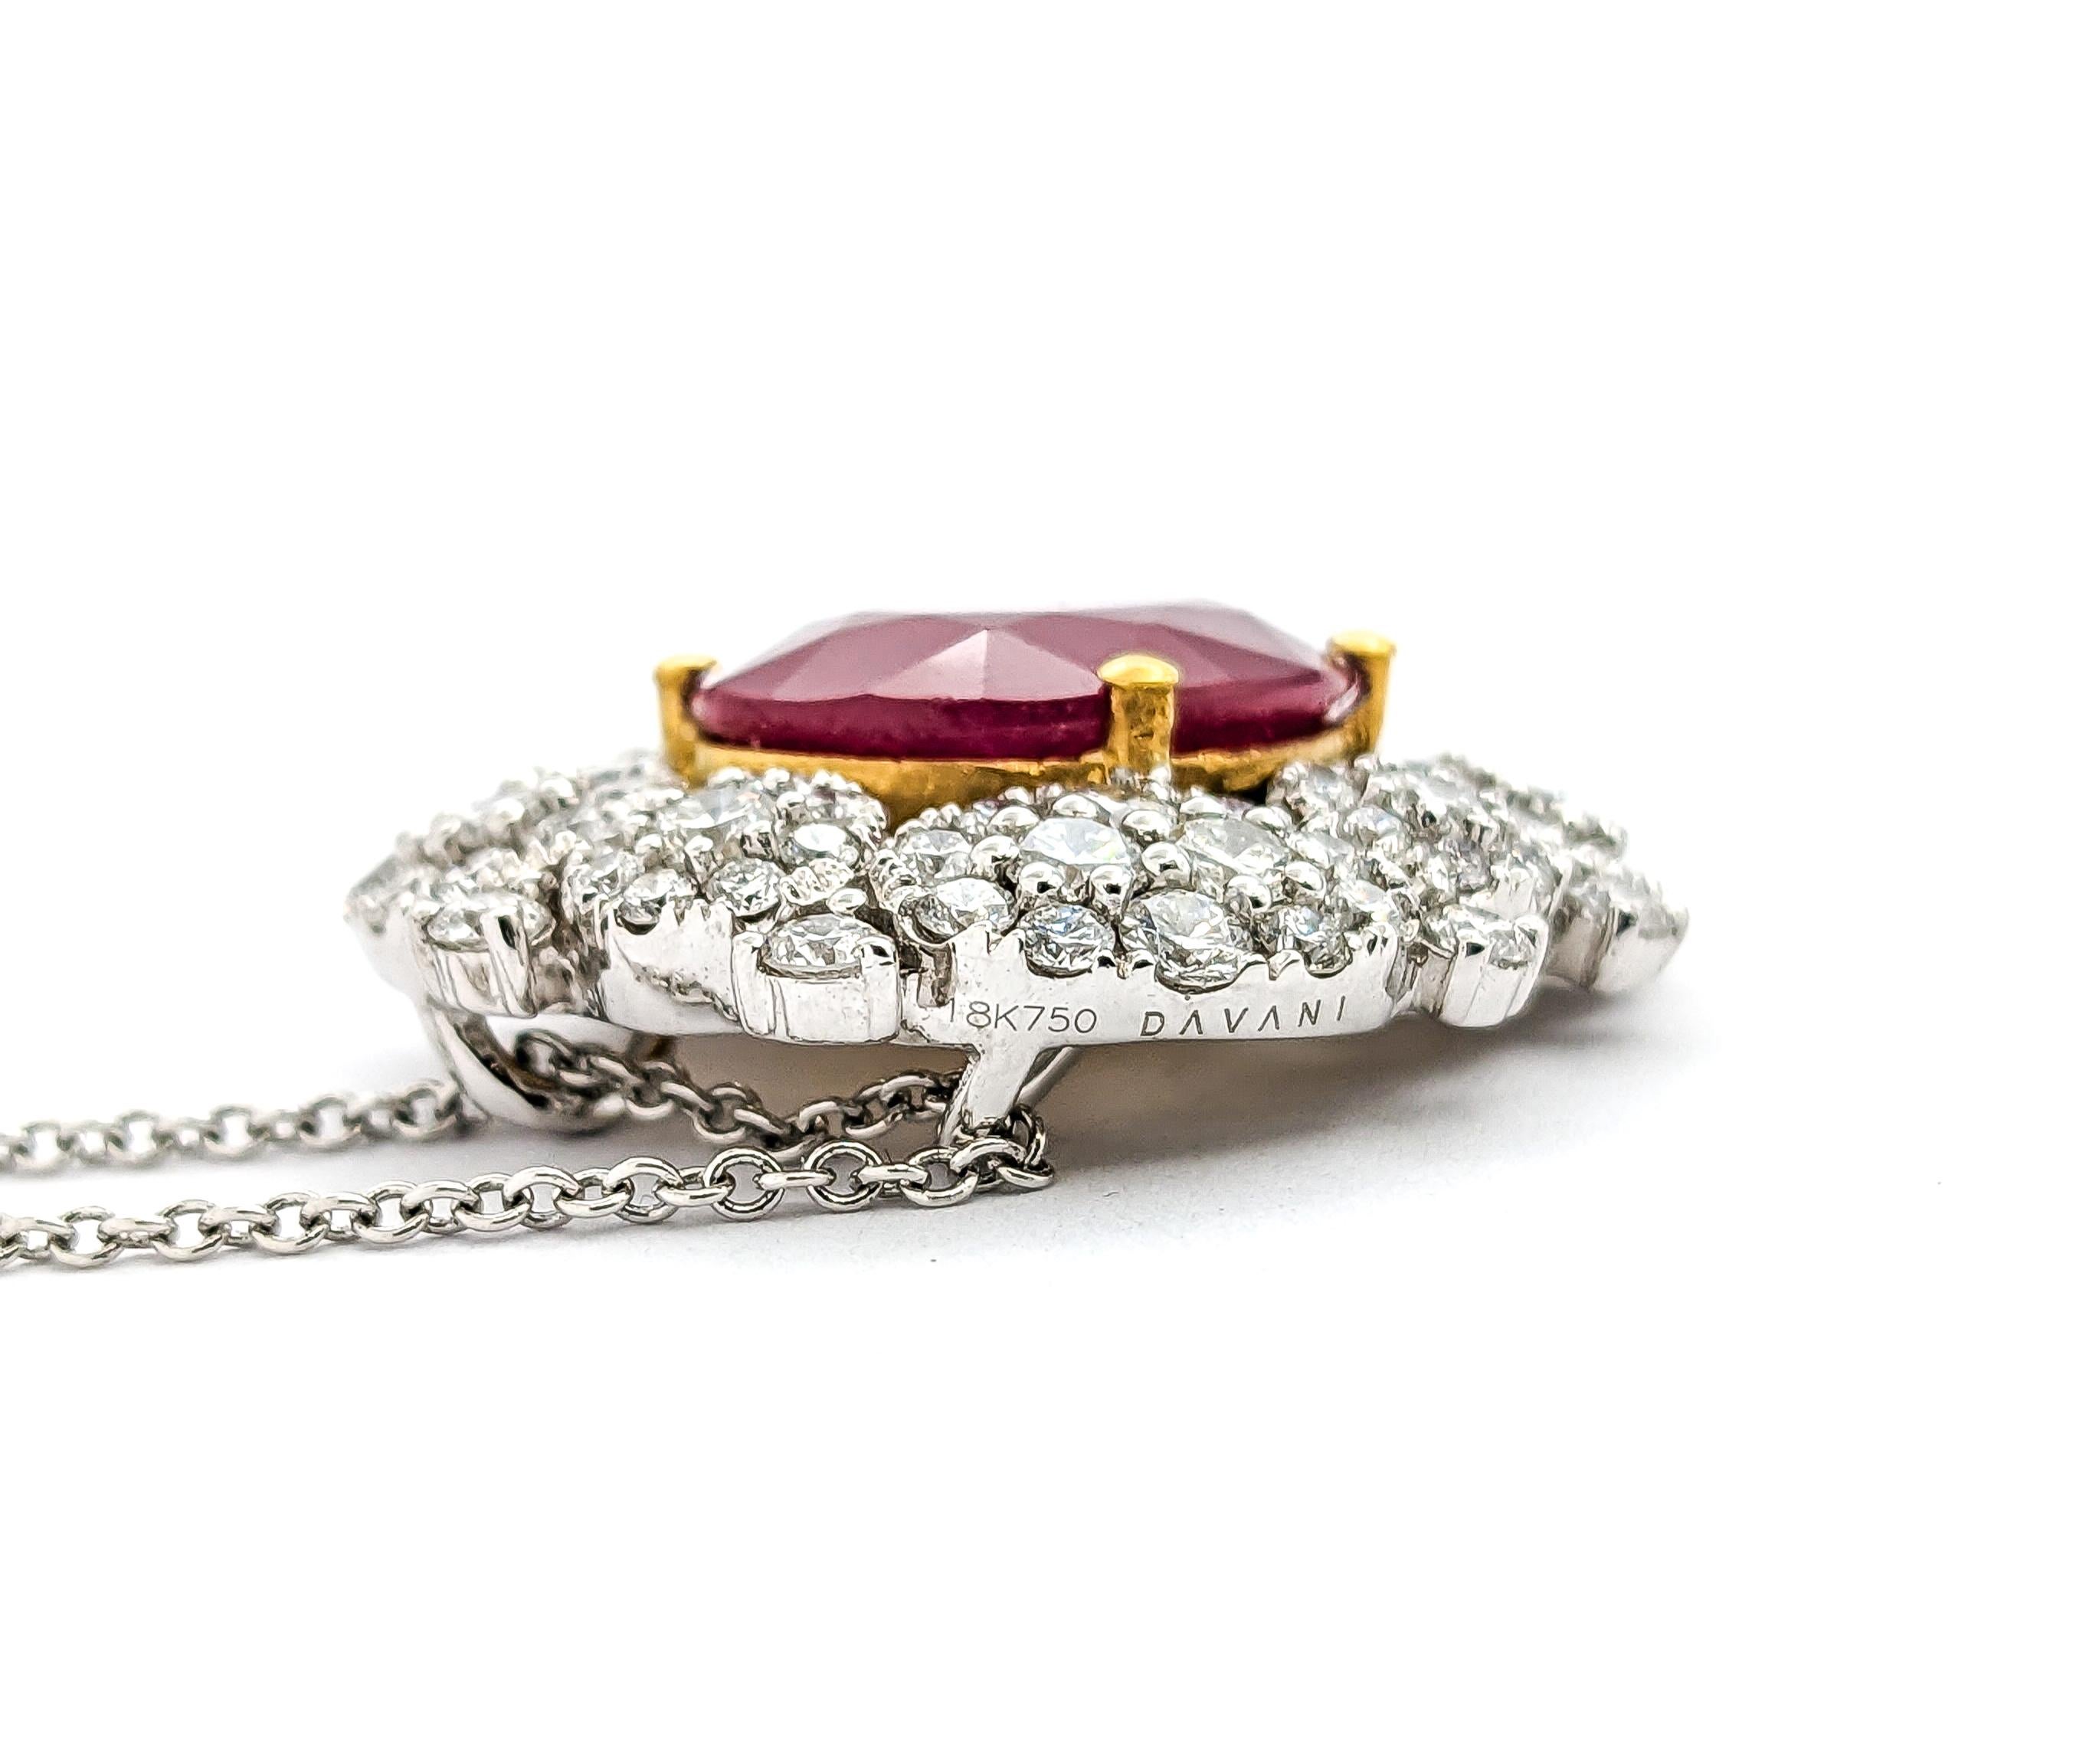 7.47ct Heat-only Ruby & 2.83ctw Diamonds Pendant In Two-Tone Gold


This exquisite gemstone fashion pendant is artfully crafted in 18ktt two-tone gold, highlighting the allure of contrast and sophistication. It features an impressive 2.83ctw of